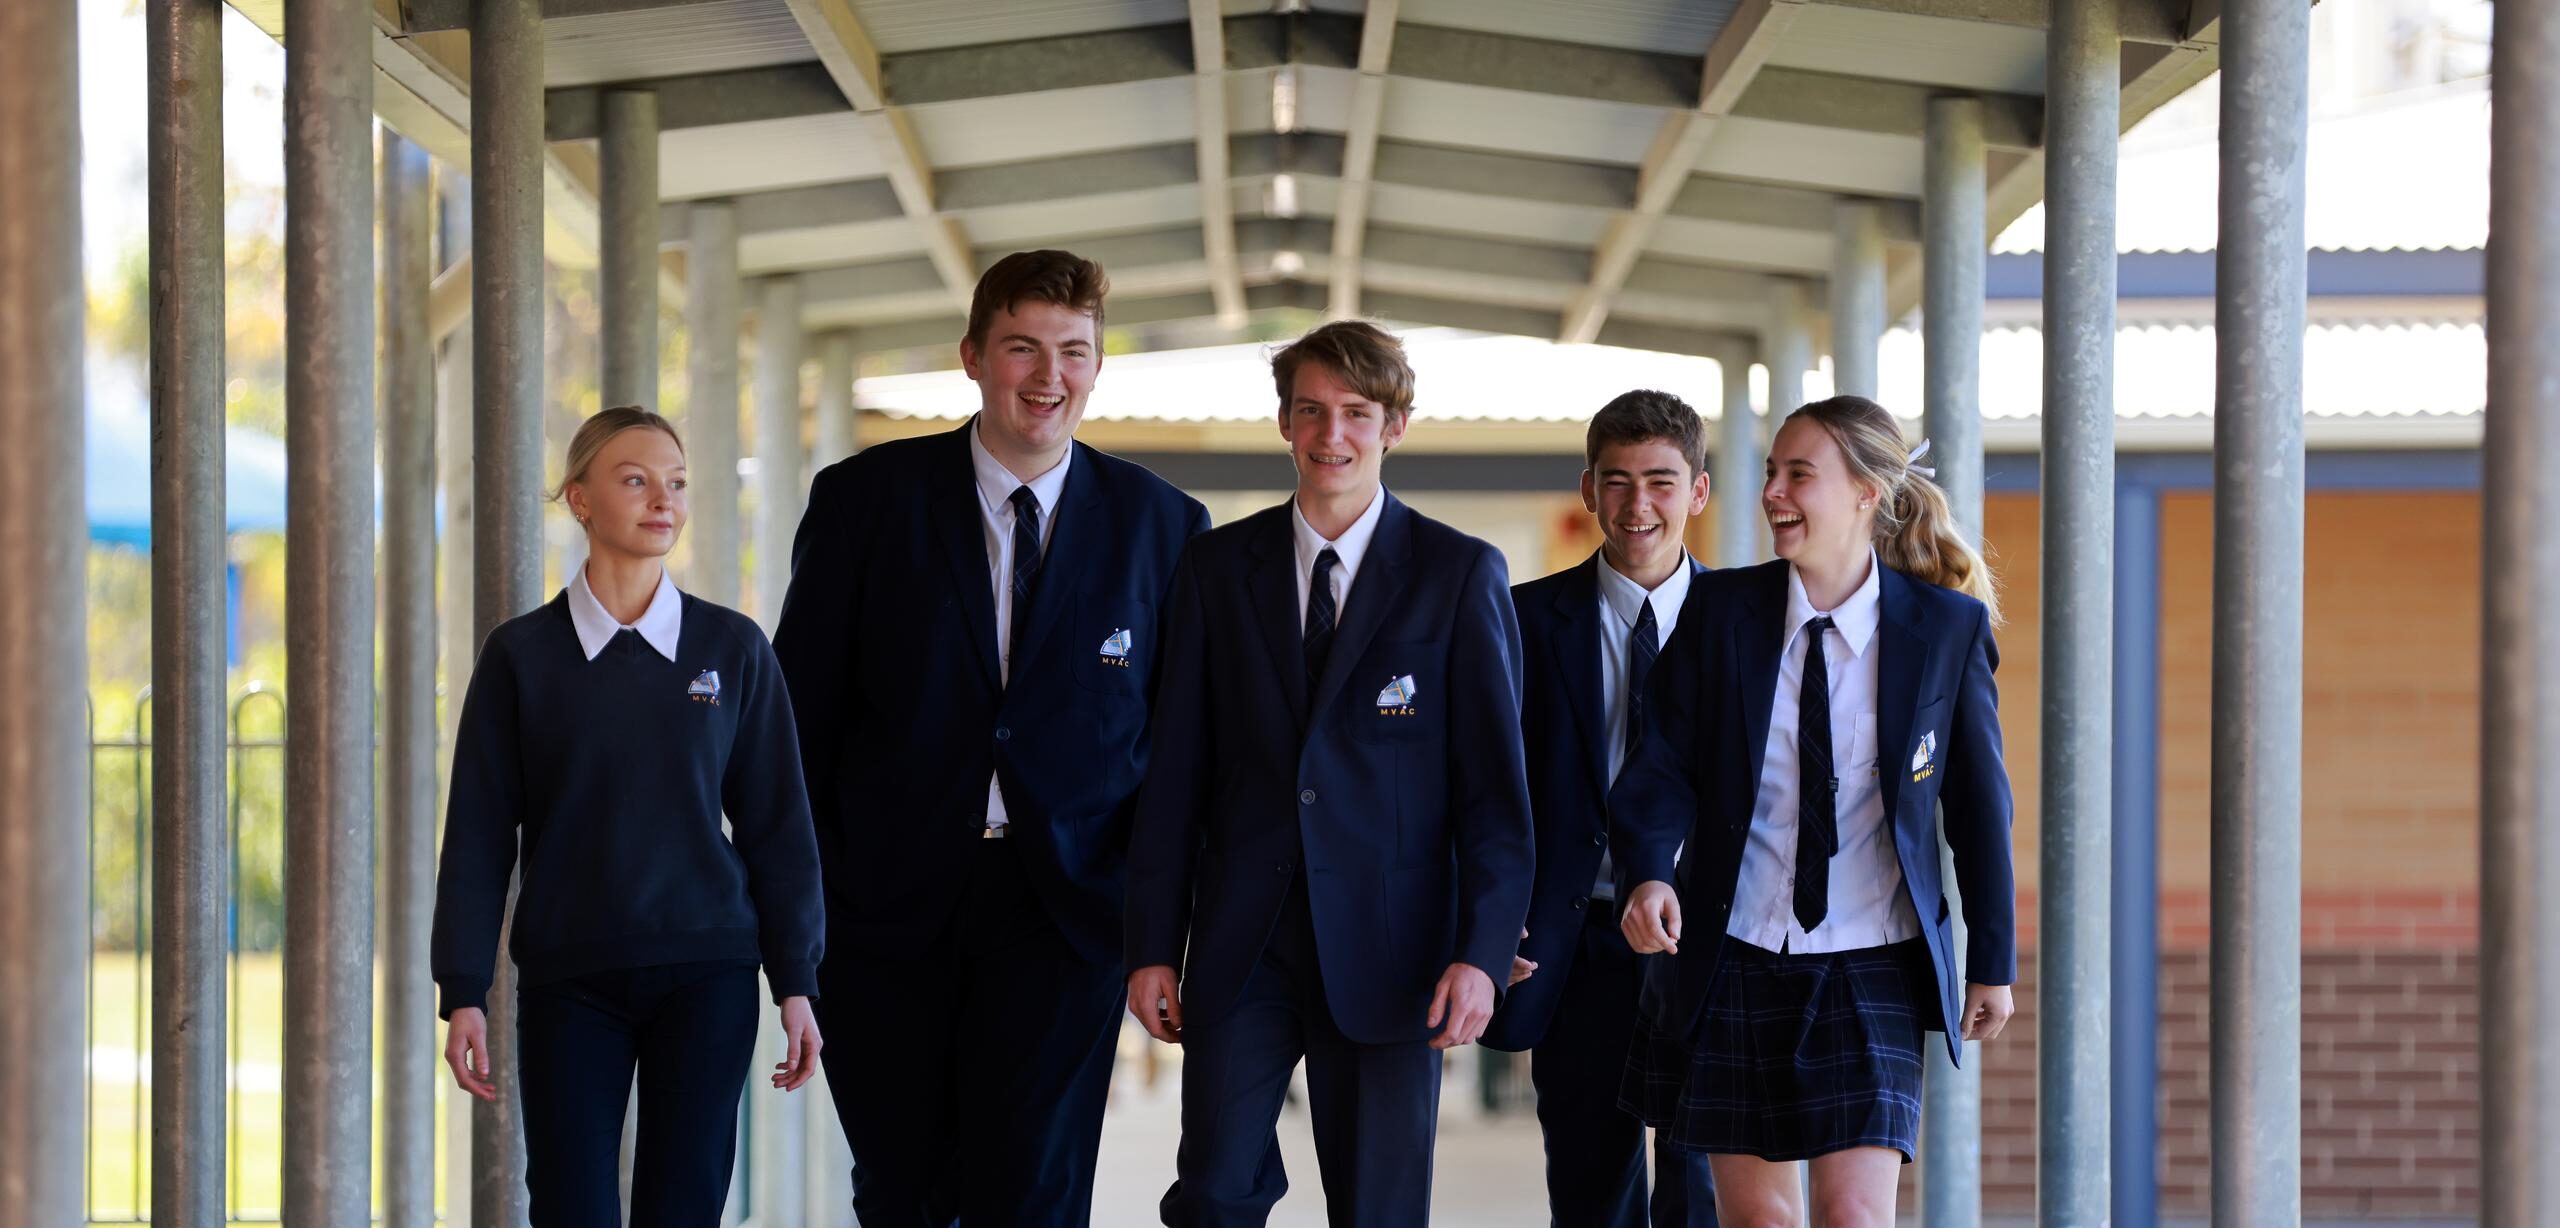 Five Senior Students wearing the Navy College blazer together laughing.